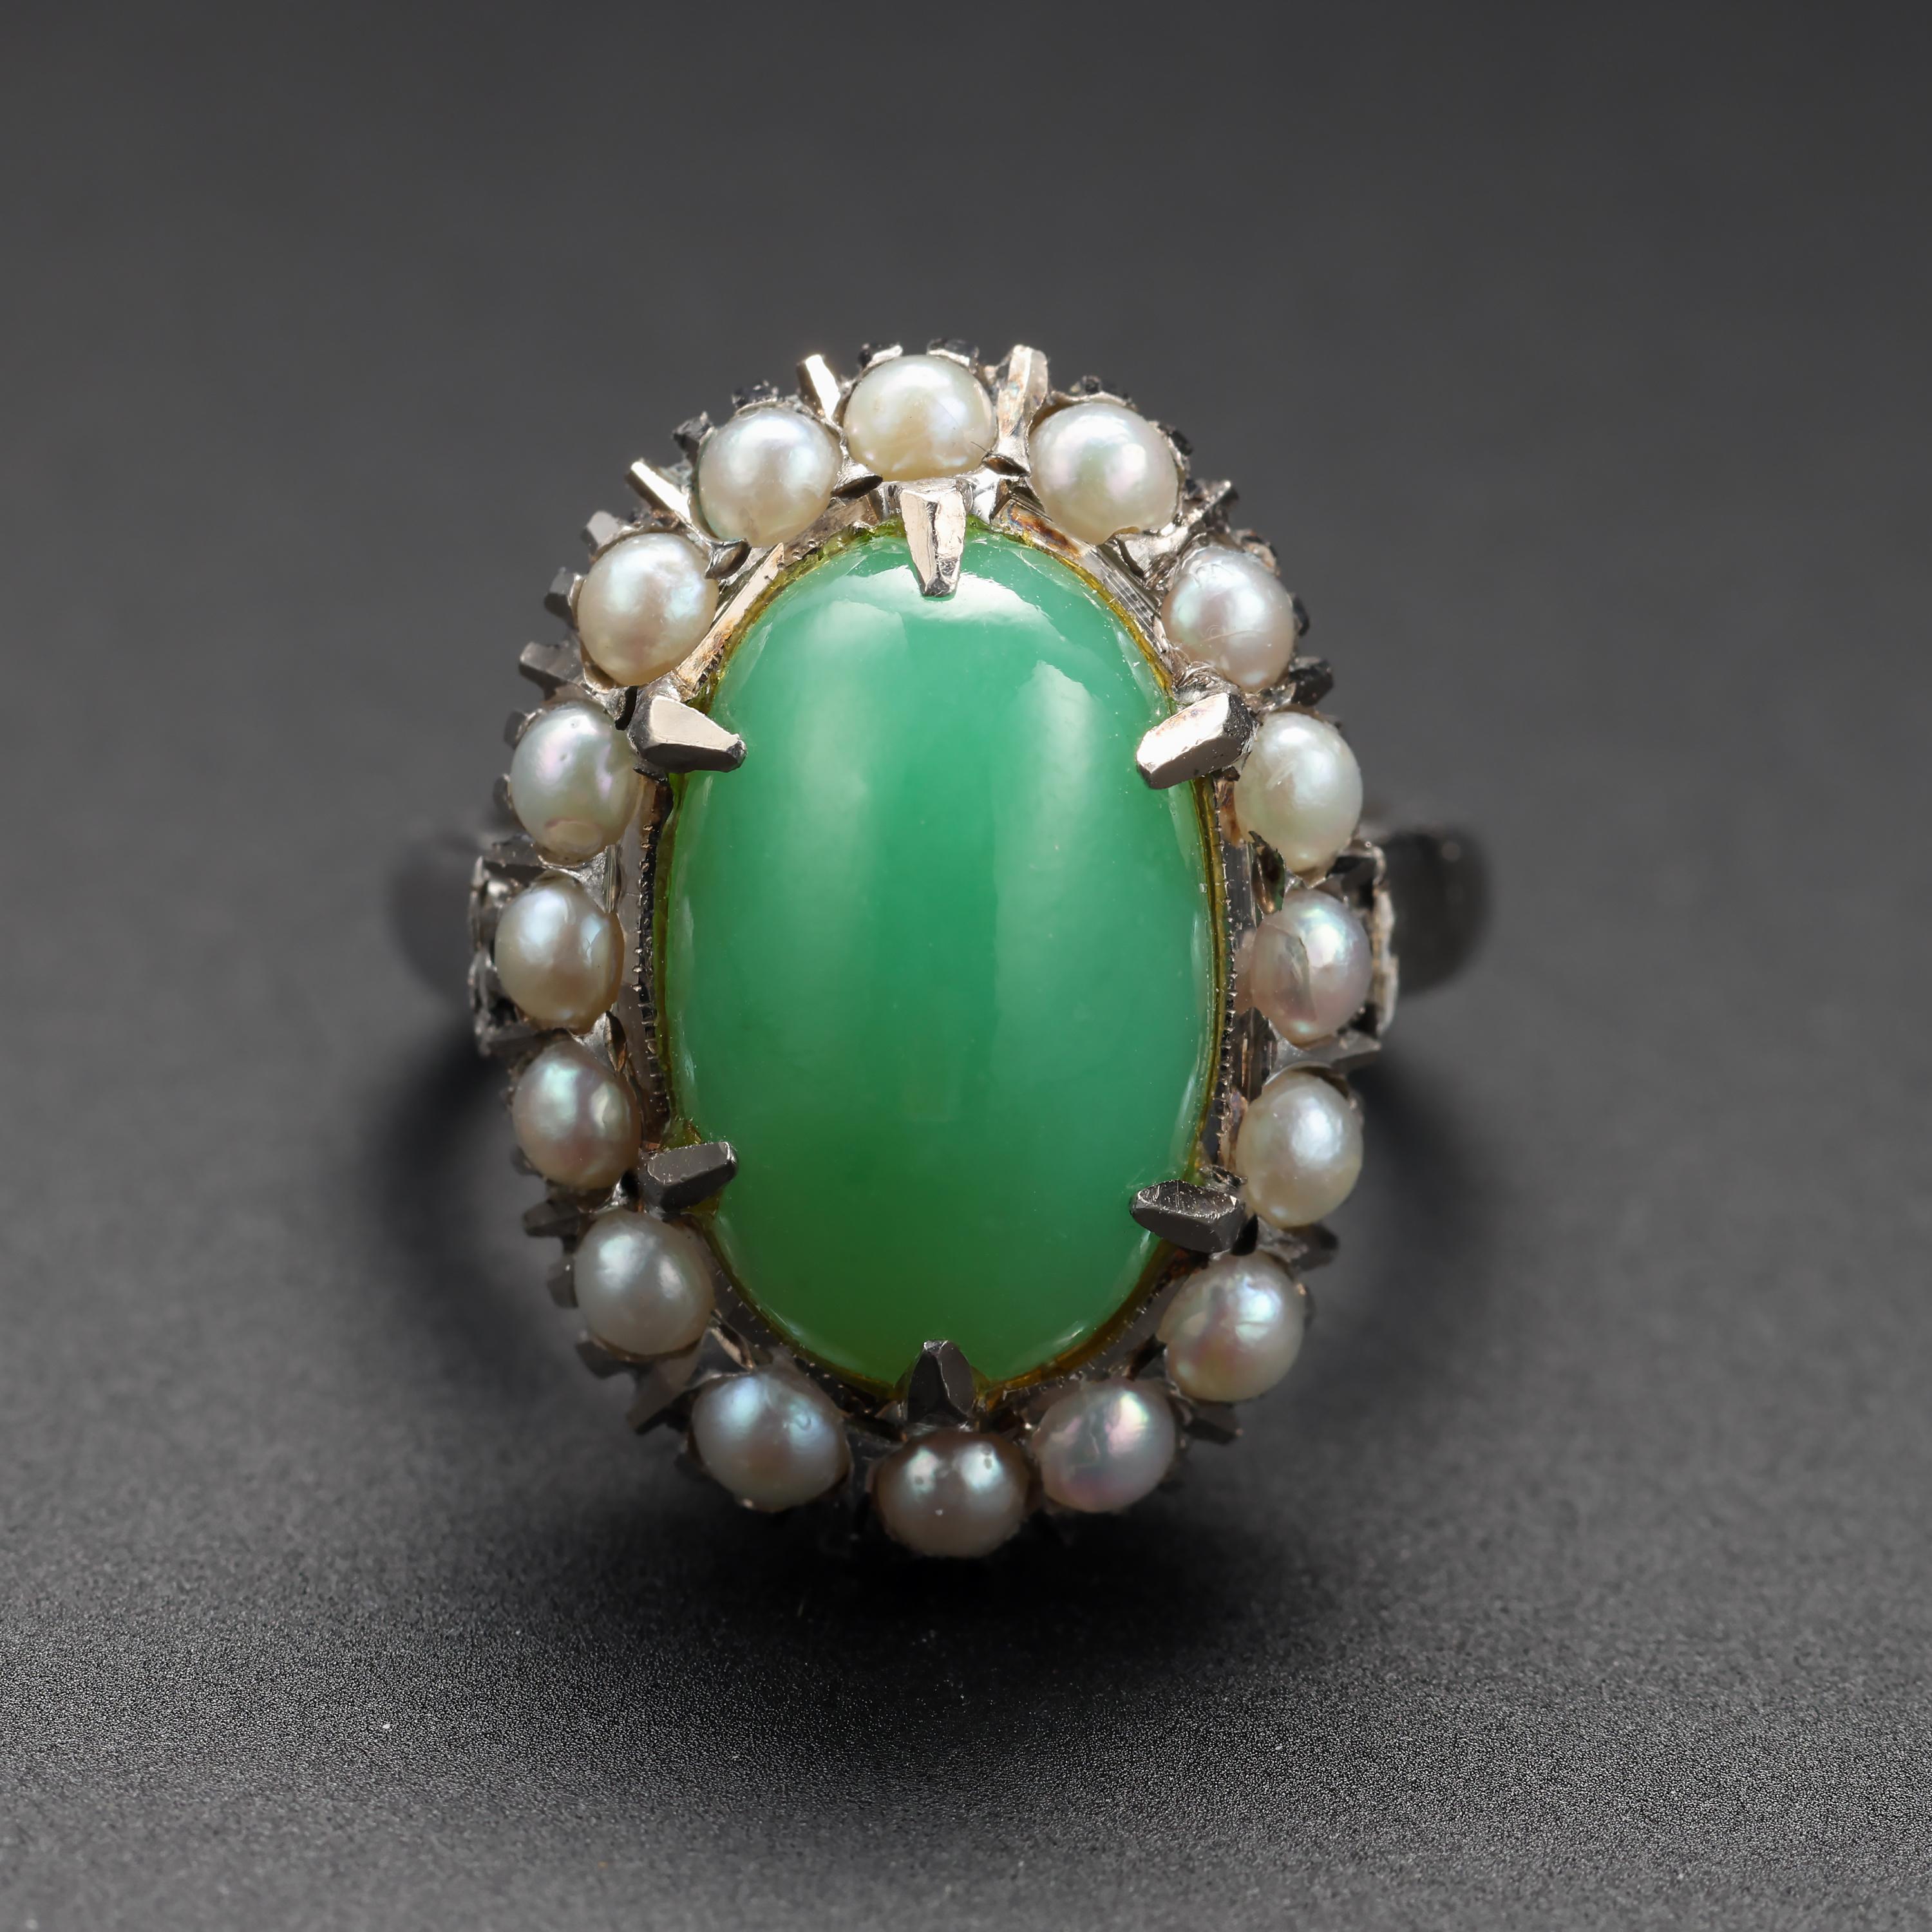 A large oval cabochon of translucent seafoam green jadeite jade is surrounded by 16 luminous natural pearls in this ever-stylish 14K white gold halo ring from the early 1950s.

The jade stone is natural and untreated and displays a high degree of